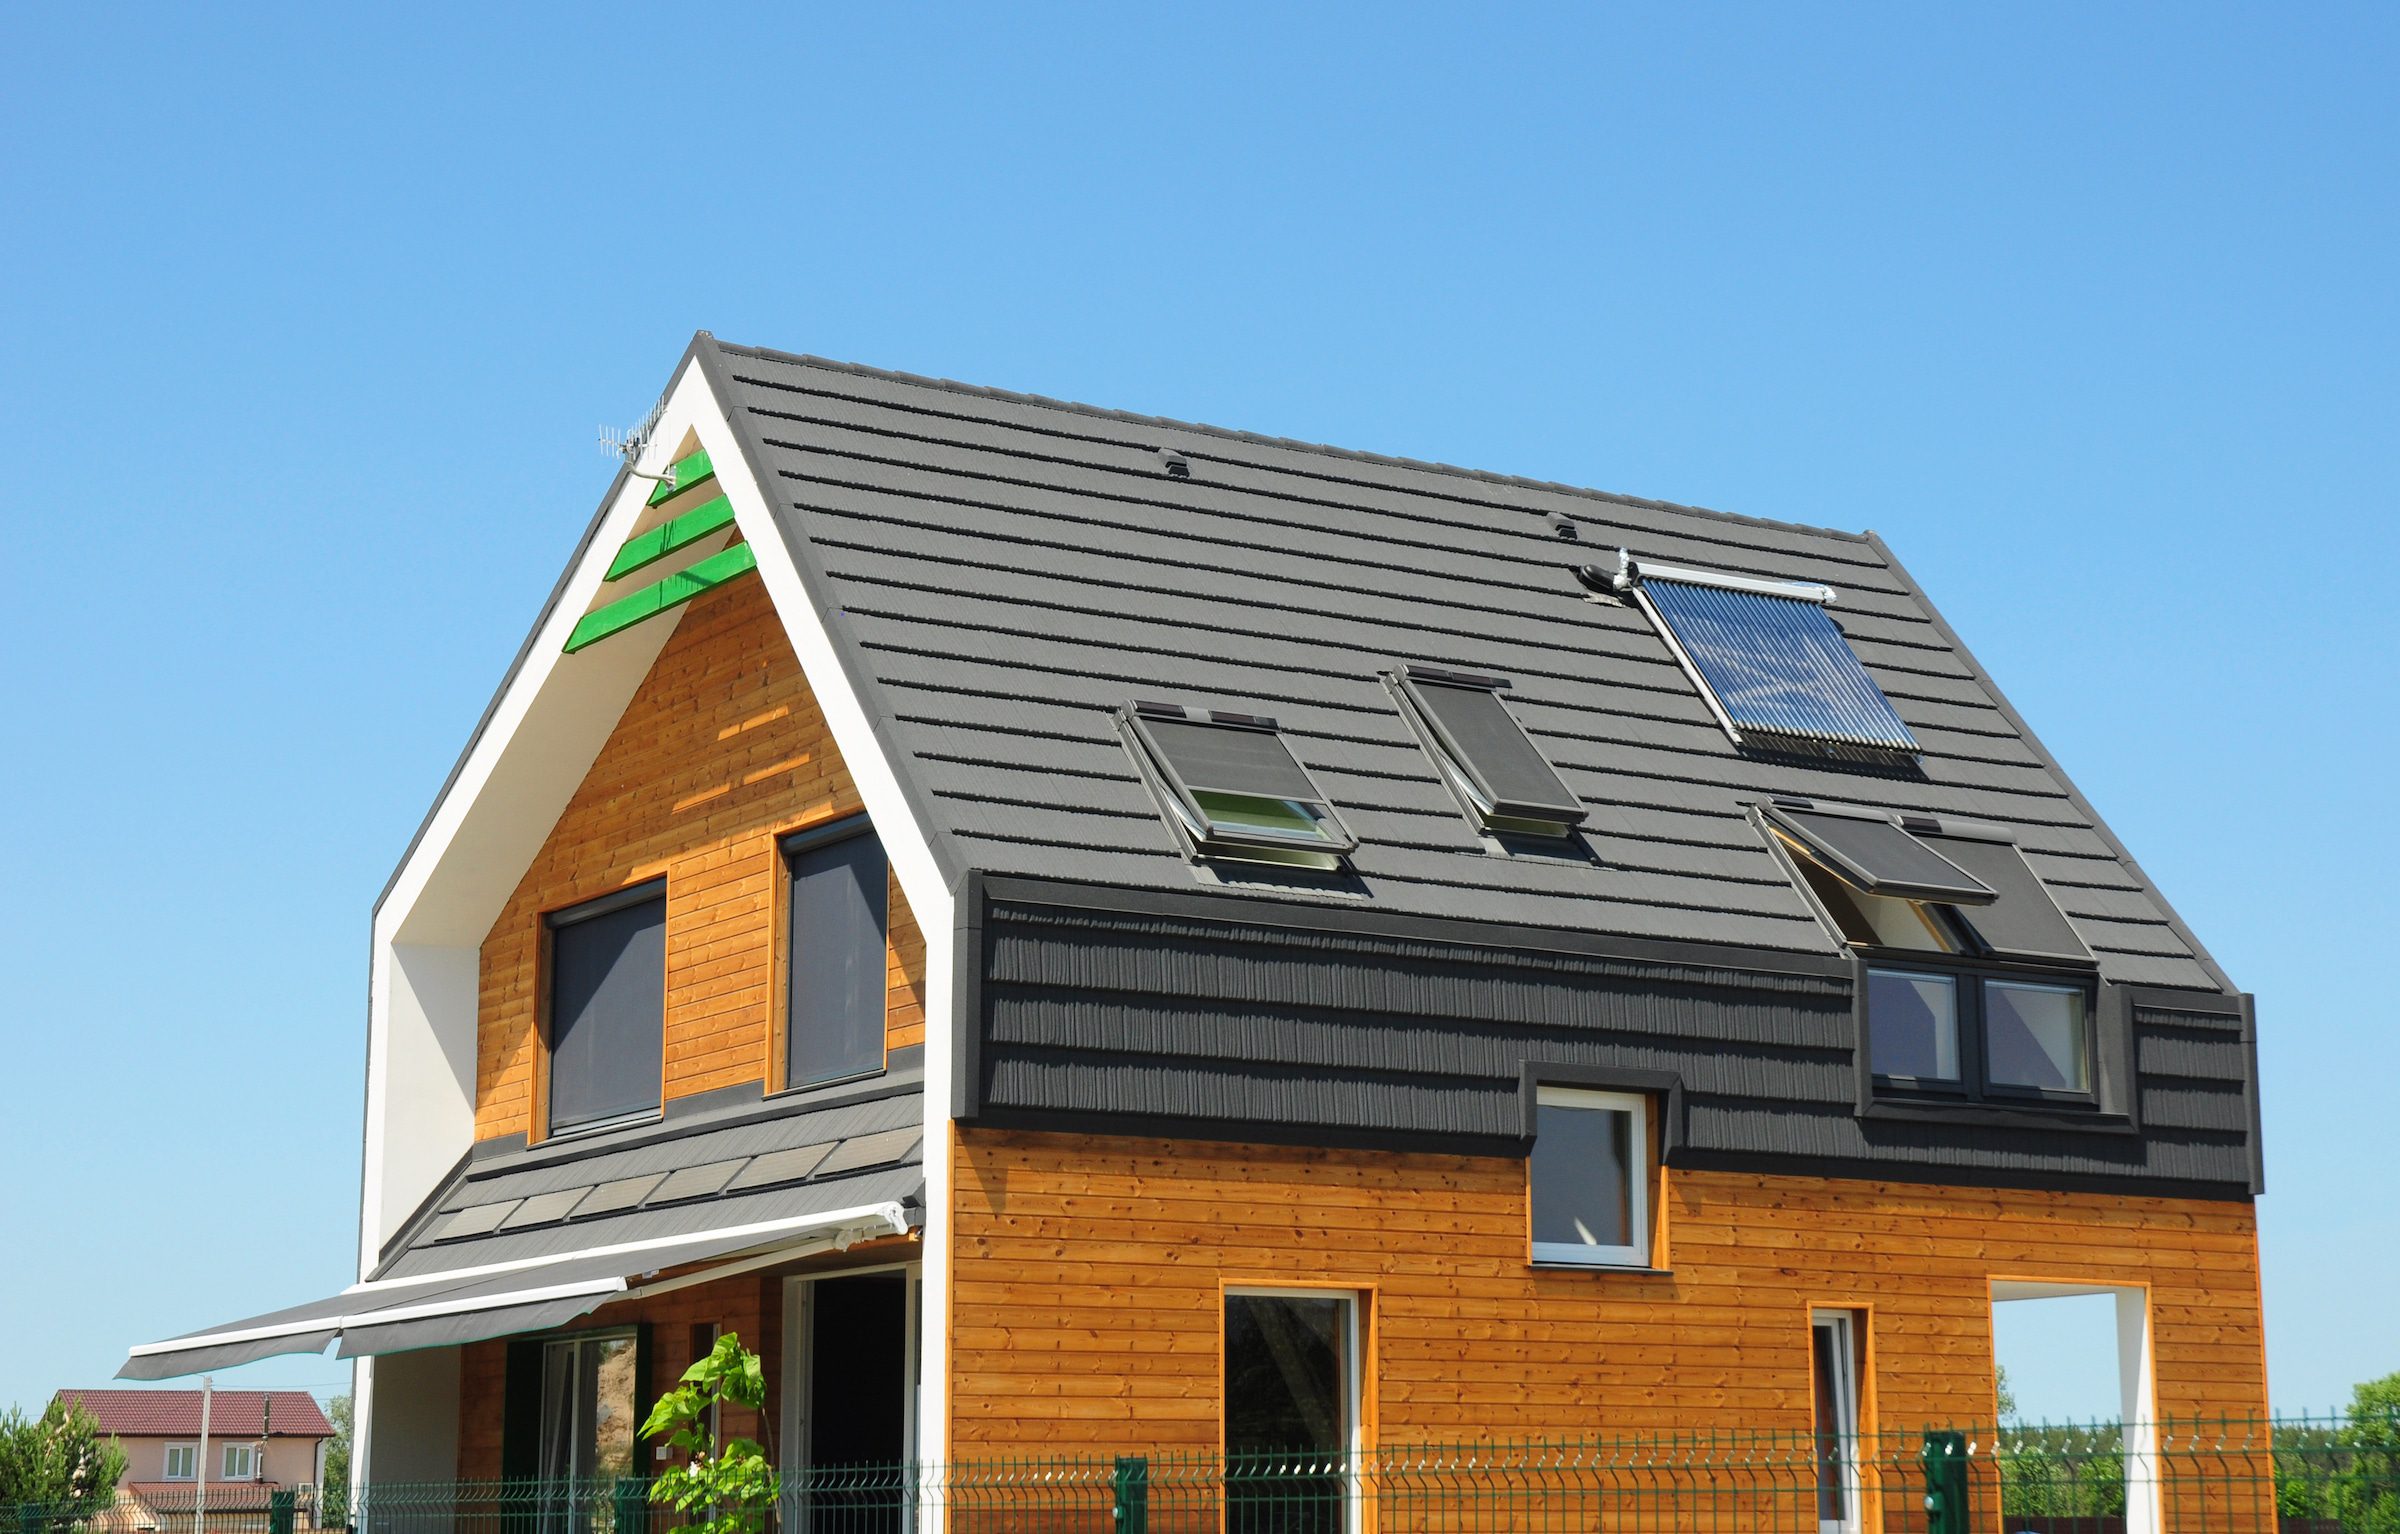 passivhaus windows fitted in a detached eco home